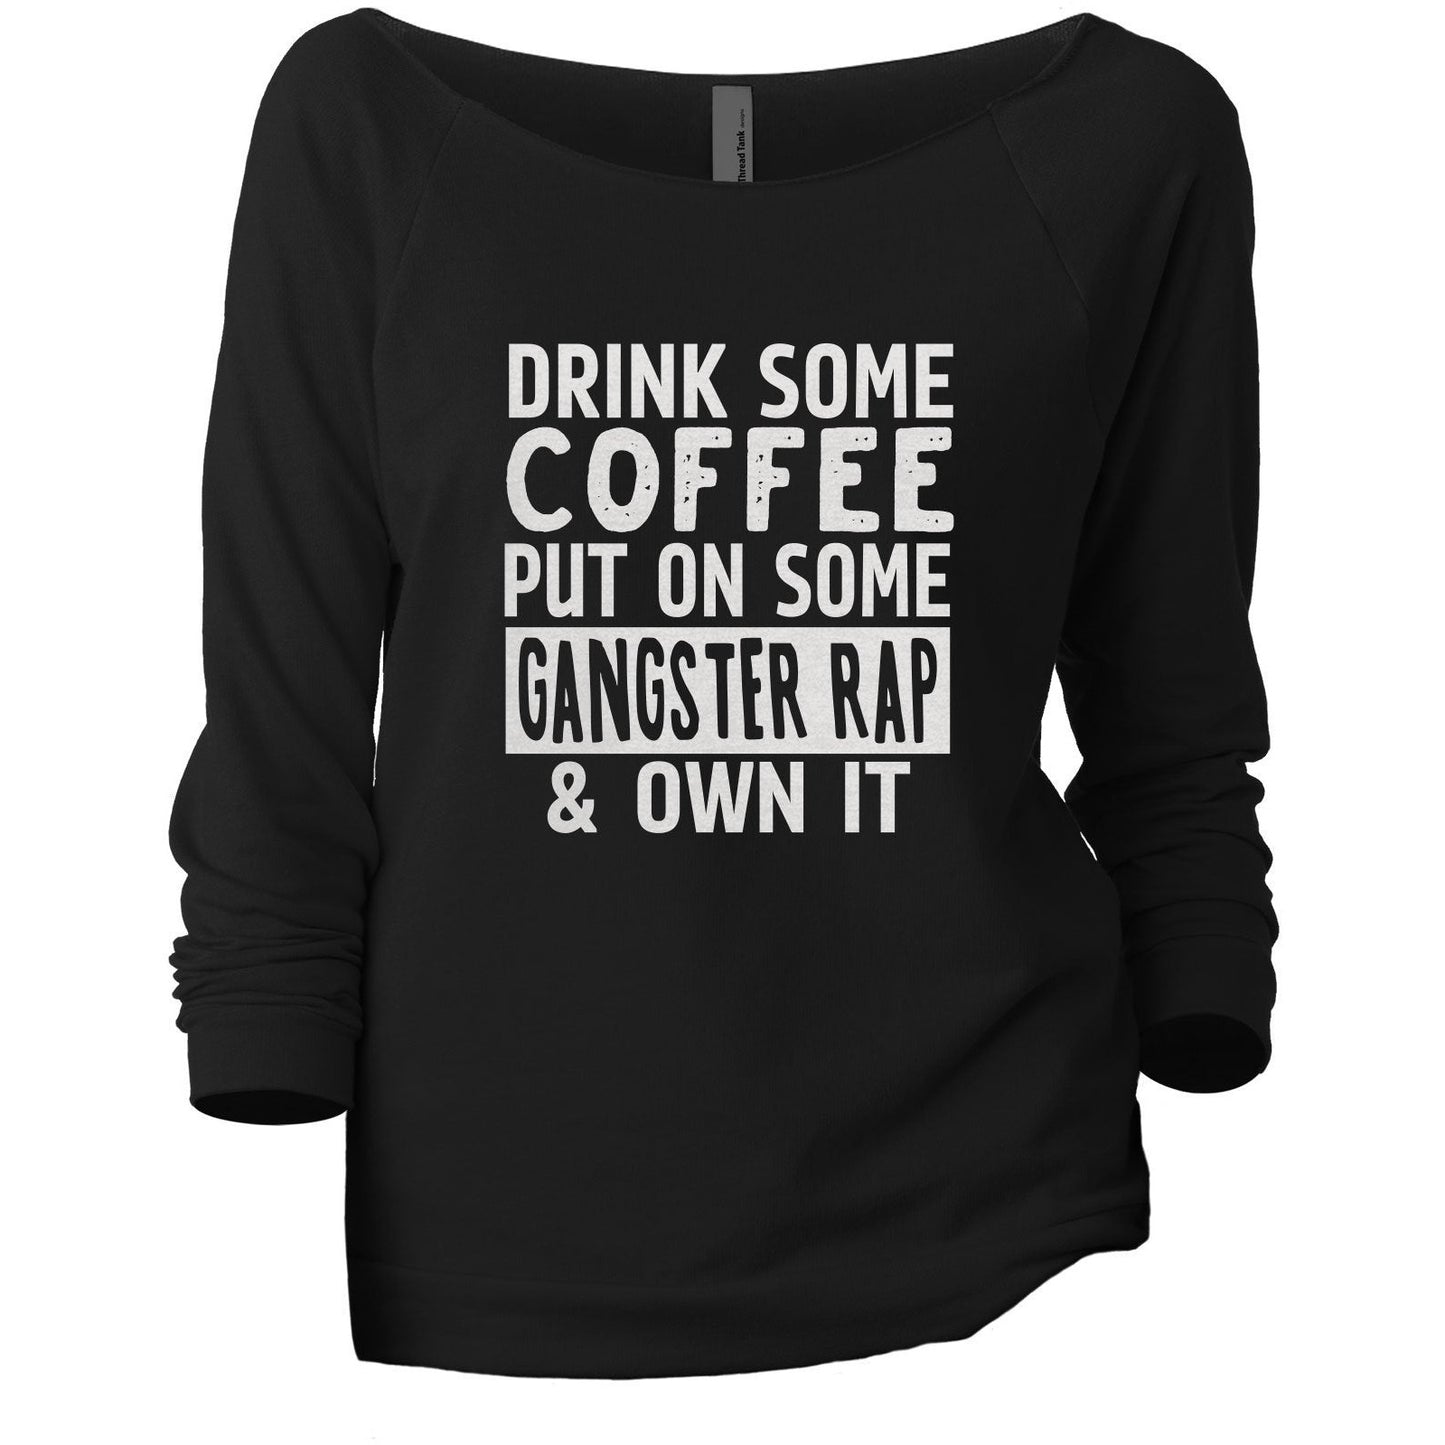 Drink Some Coffee Put on Some Gangster Rap and Own It Women's Graphic Printed Lightweight Slouchy 3/4 Sleeves Sweatshirt Black